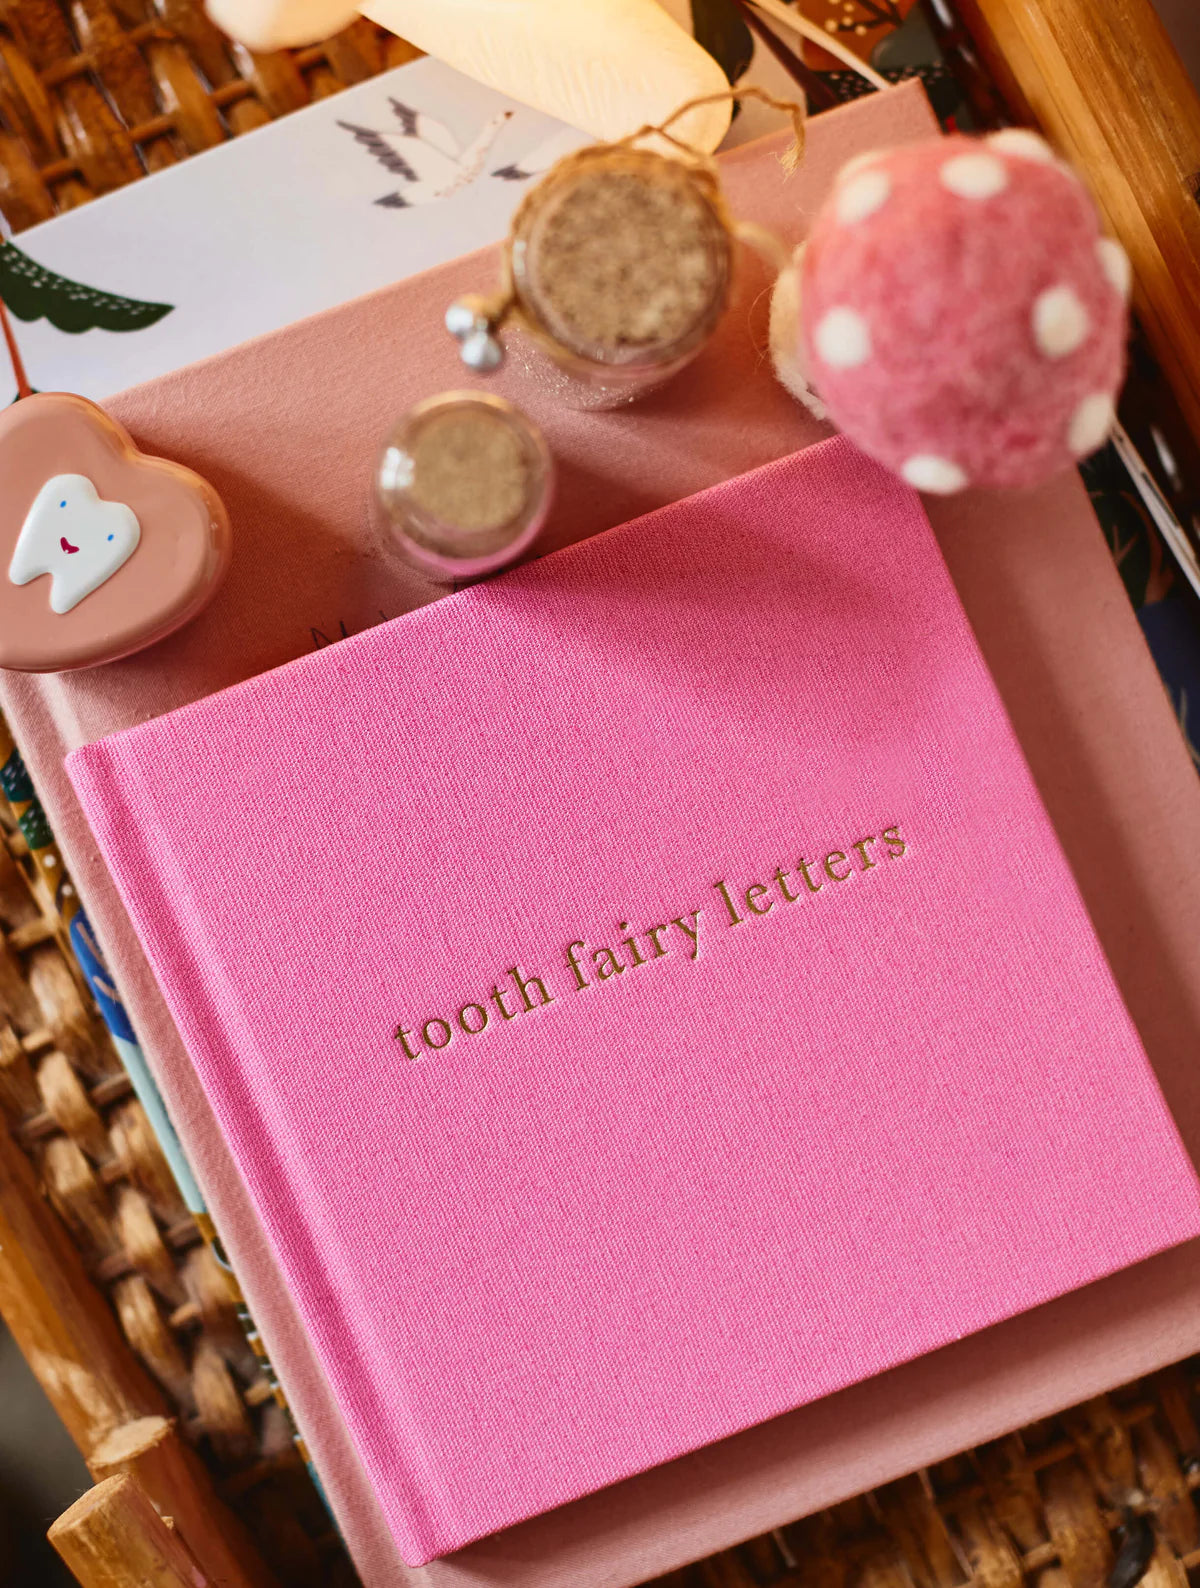 Tooth Fairy Letters